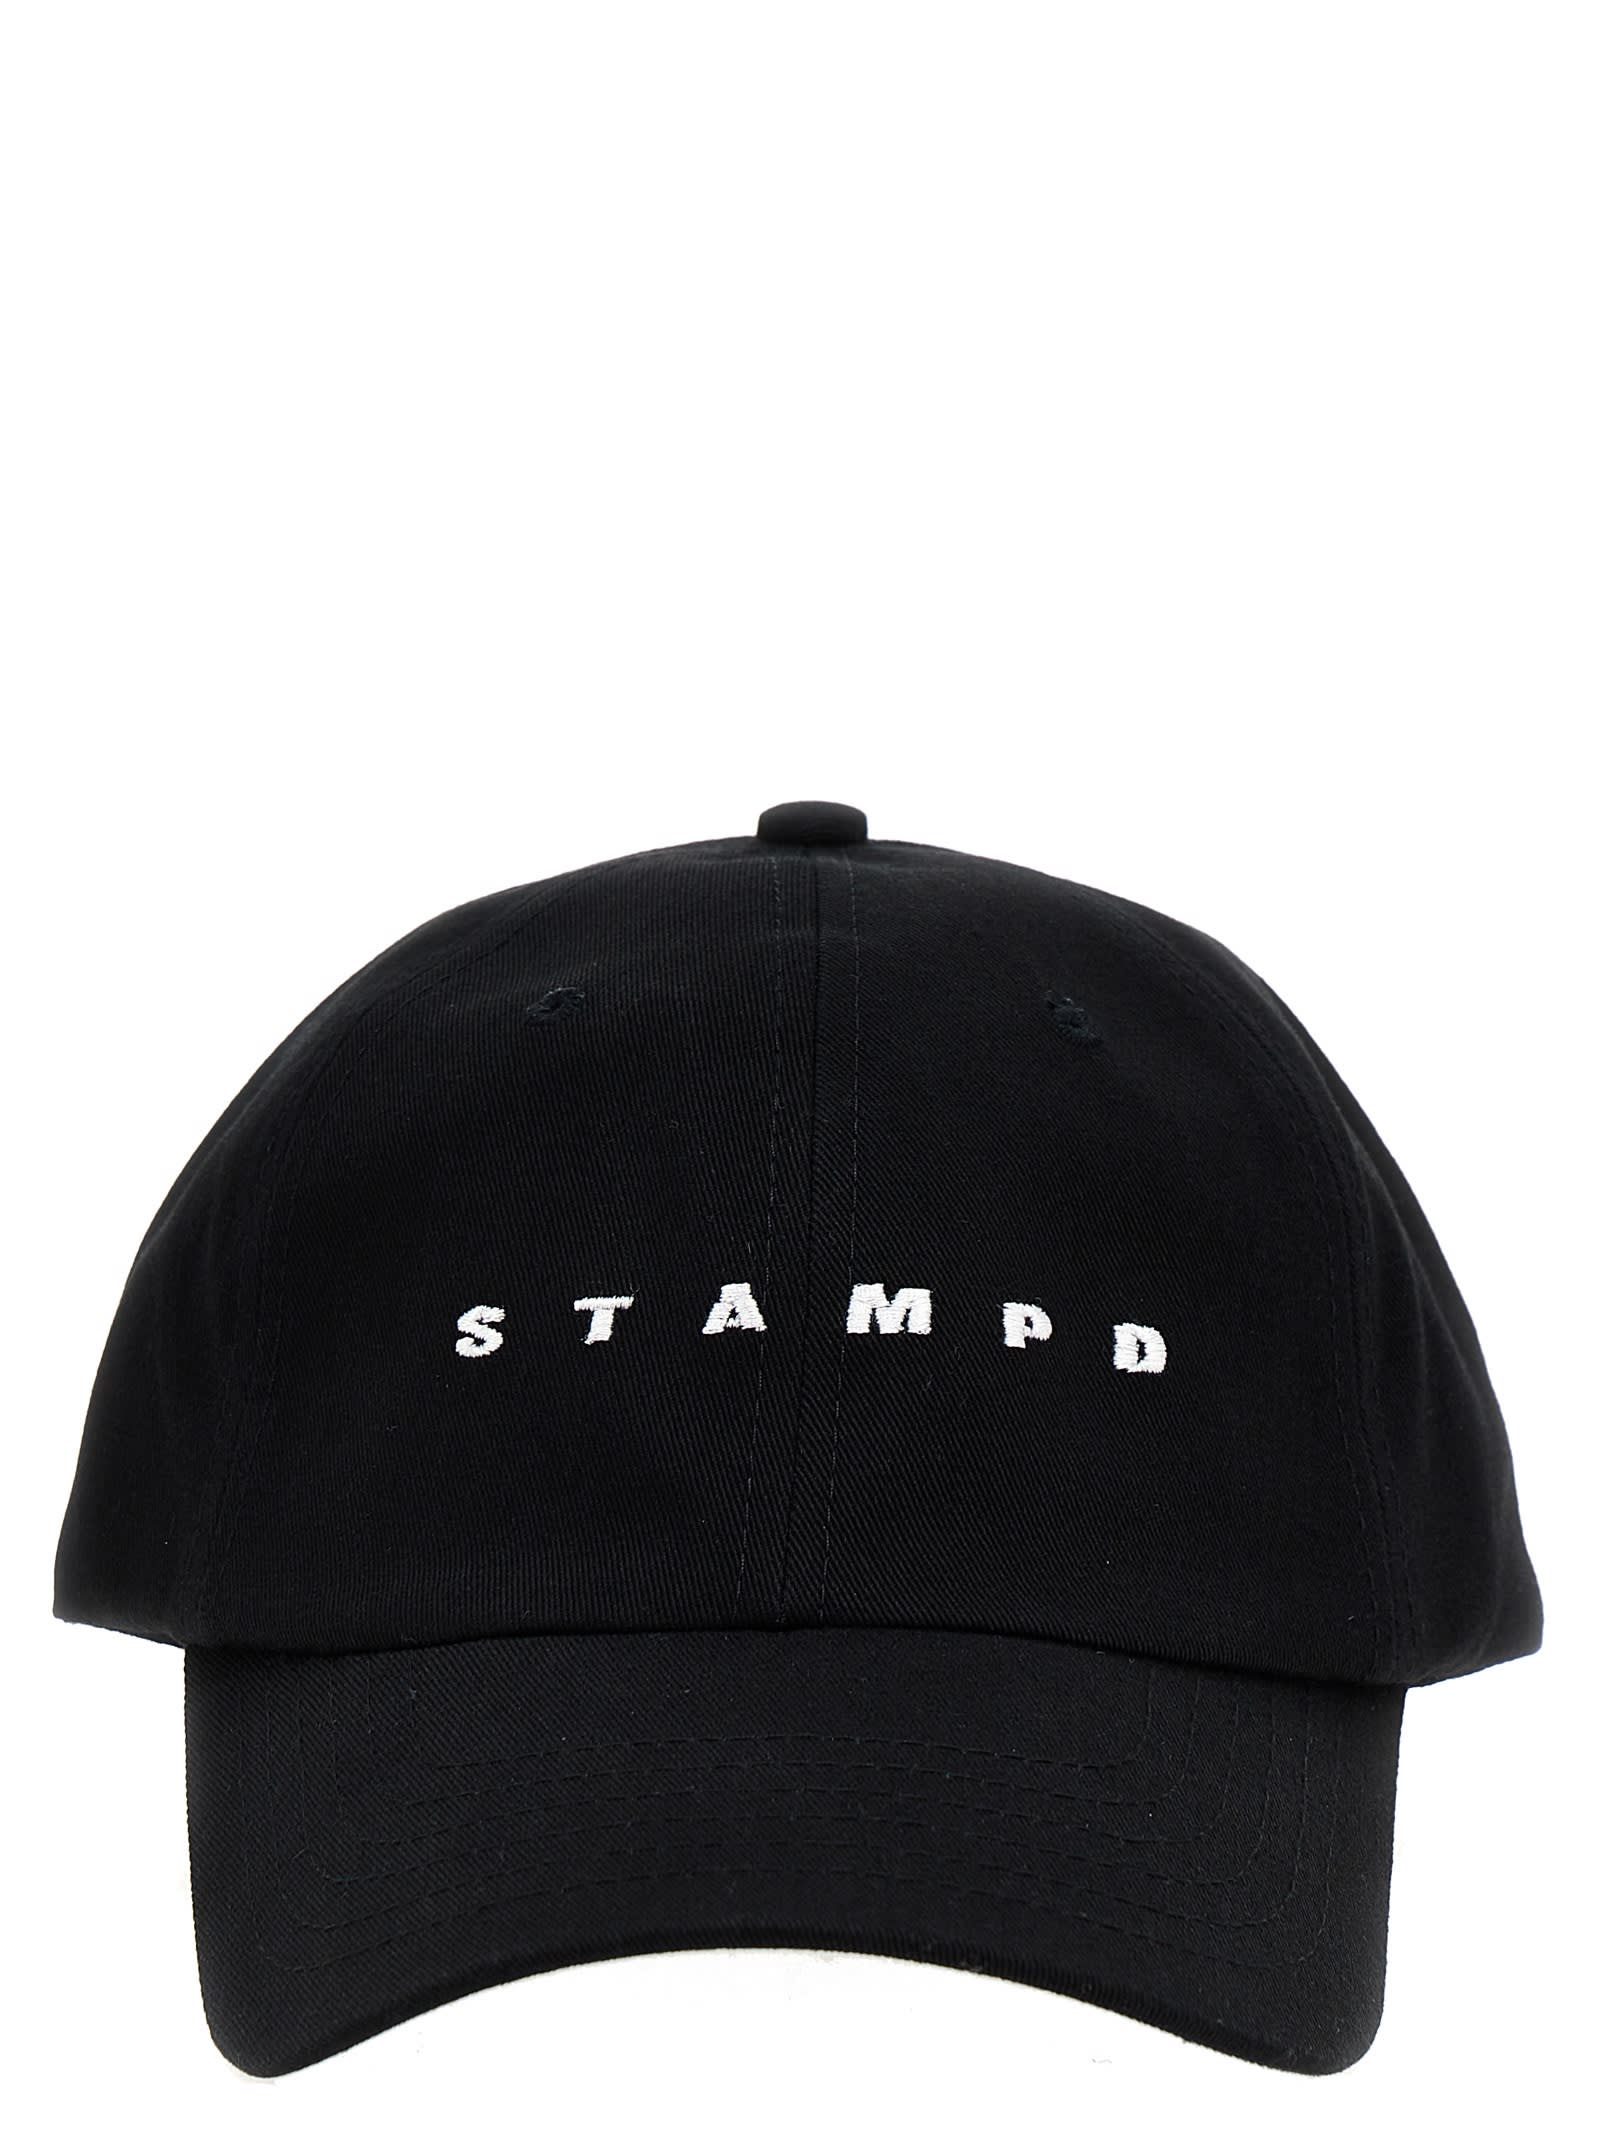 STAMPD LOGO EMBROIDERY CAP